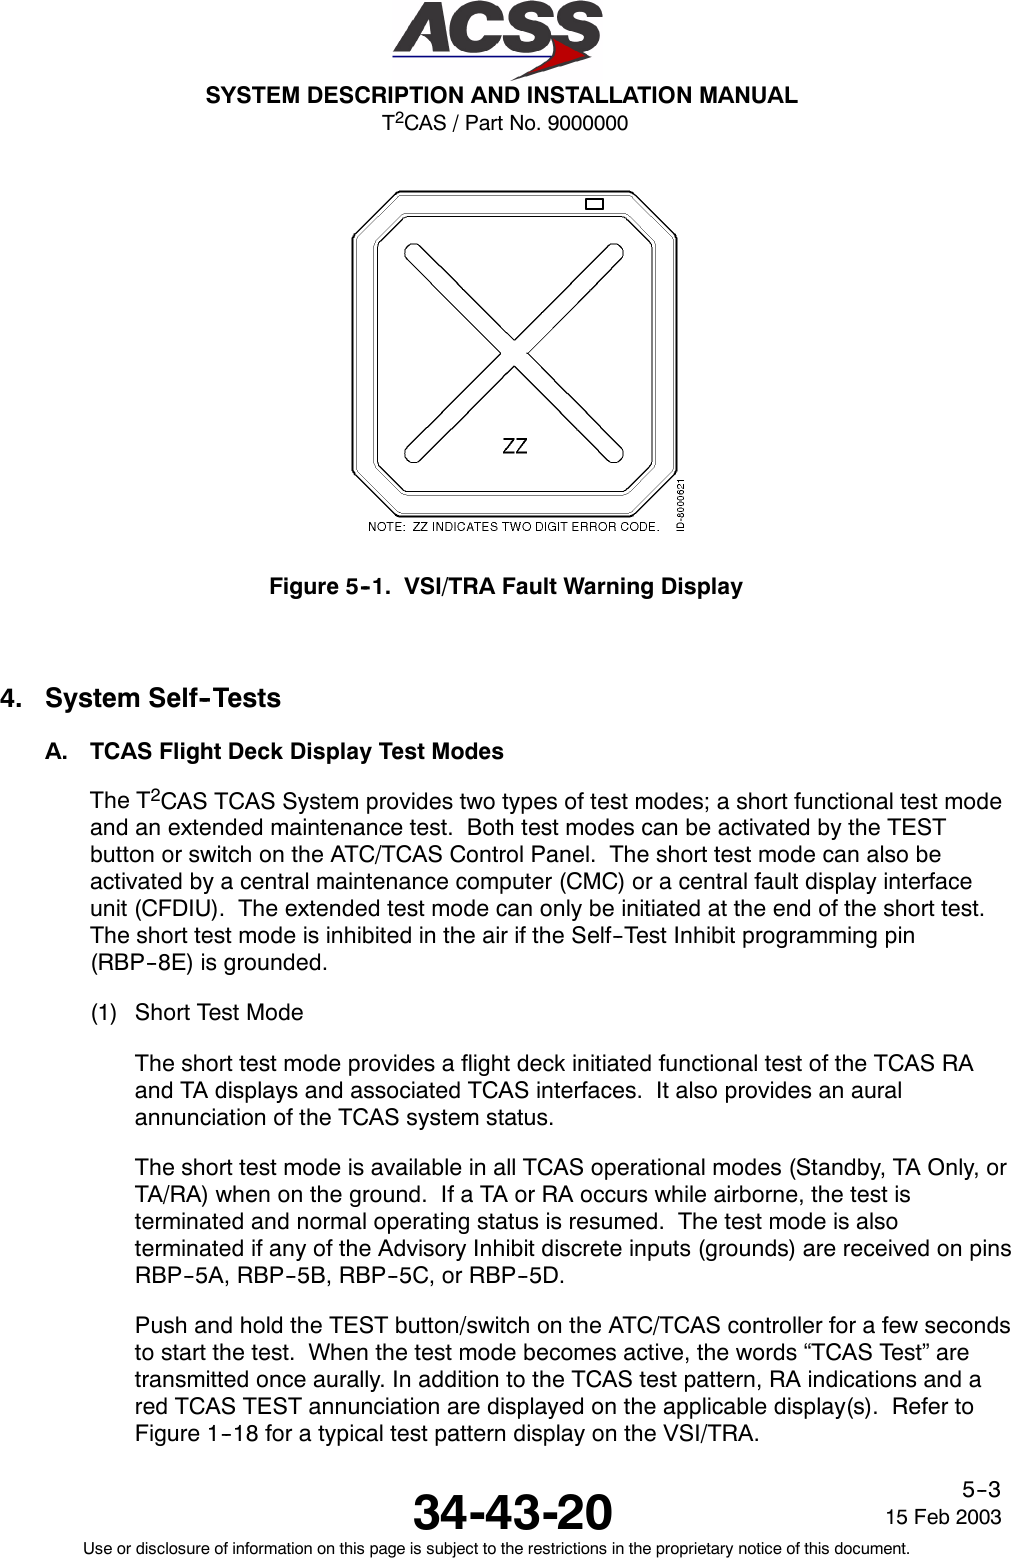 T2CAS / Part No. 9000000SYSTEM DESCRIPTION AND INSTALLATION MANUAL34-43-20 15 Feb 2003Use or disclosure of information on this page is subject to the restrictions in the proprietary notice of this document.5--3Figure 5--1. VSI/TRA Fault Warning Display4. System Self--TestsA. TCAS Flight Deck Display Test ModesThe T2CAS TCAS System provides two types of test modes; a short functional test modeand an extended maintenance test. Both test modes can be activated by the TESTbutton or switch on the ATC/TCAS Control Panel. The short test mode can also beactivated by a central maintenance computer (CMC) or a central fault display interfaceunit (CFDIU). The extended test mode can only be initiated at the end of the short test.The short test mode is inhibited in the air if the Self--Test Inhibit programming pin(RBP--8E) is grounded.(1) Short Test ModeThe short test mode provides a flight deck initiated functional test of the TCAS RAand TA displays and associated TCAS interfaces. It also provides an auralannunciation of the TCAS system status.The short test mode is available in all TCAS operational modes (Standby, TA Only, orTA/RA) when on the ground. If a TA or RA occurs while airborne, the test isterminated and normal operating status is resumed. The test mode is alsoterminated if any of the Advisory Inhibit discrete inputs (grounds) are received on pinsRBP--5A, RBP--5B, RBP--5C, or RBP--5D.Push and hold the TEST button/switch on the ATC/TCAS controller for a few secondsto start the test. When the test mode becomes active, the words “TCAS Test” aretransmitted once aurally. In addition to the TCAS test pattern, RA indications and ared TCAS TEST annunciation are displayed on the applicable display(s). Refer toFigure 1--18 for a typical test pattern display on the VSI/TRA.